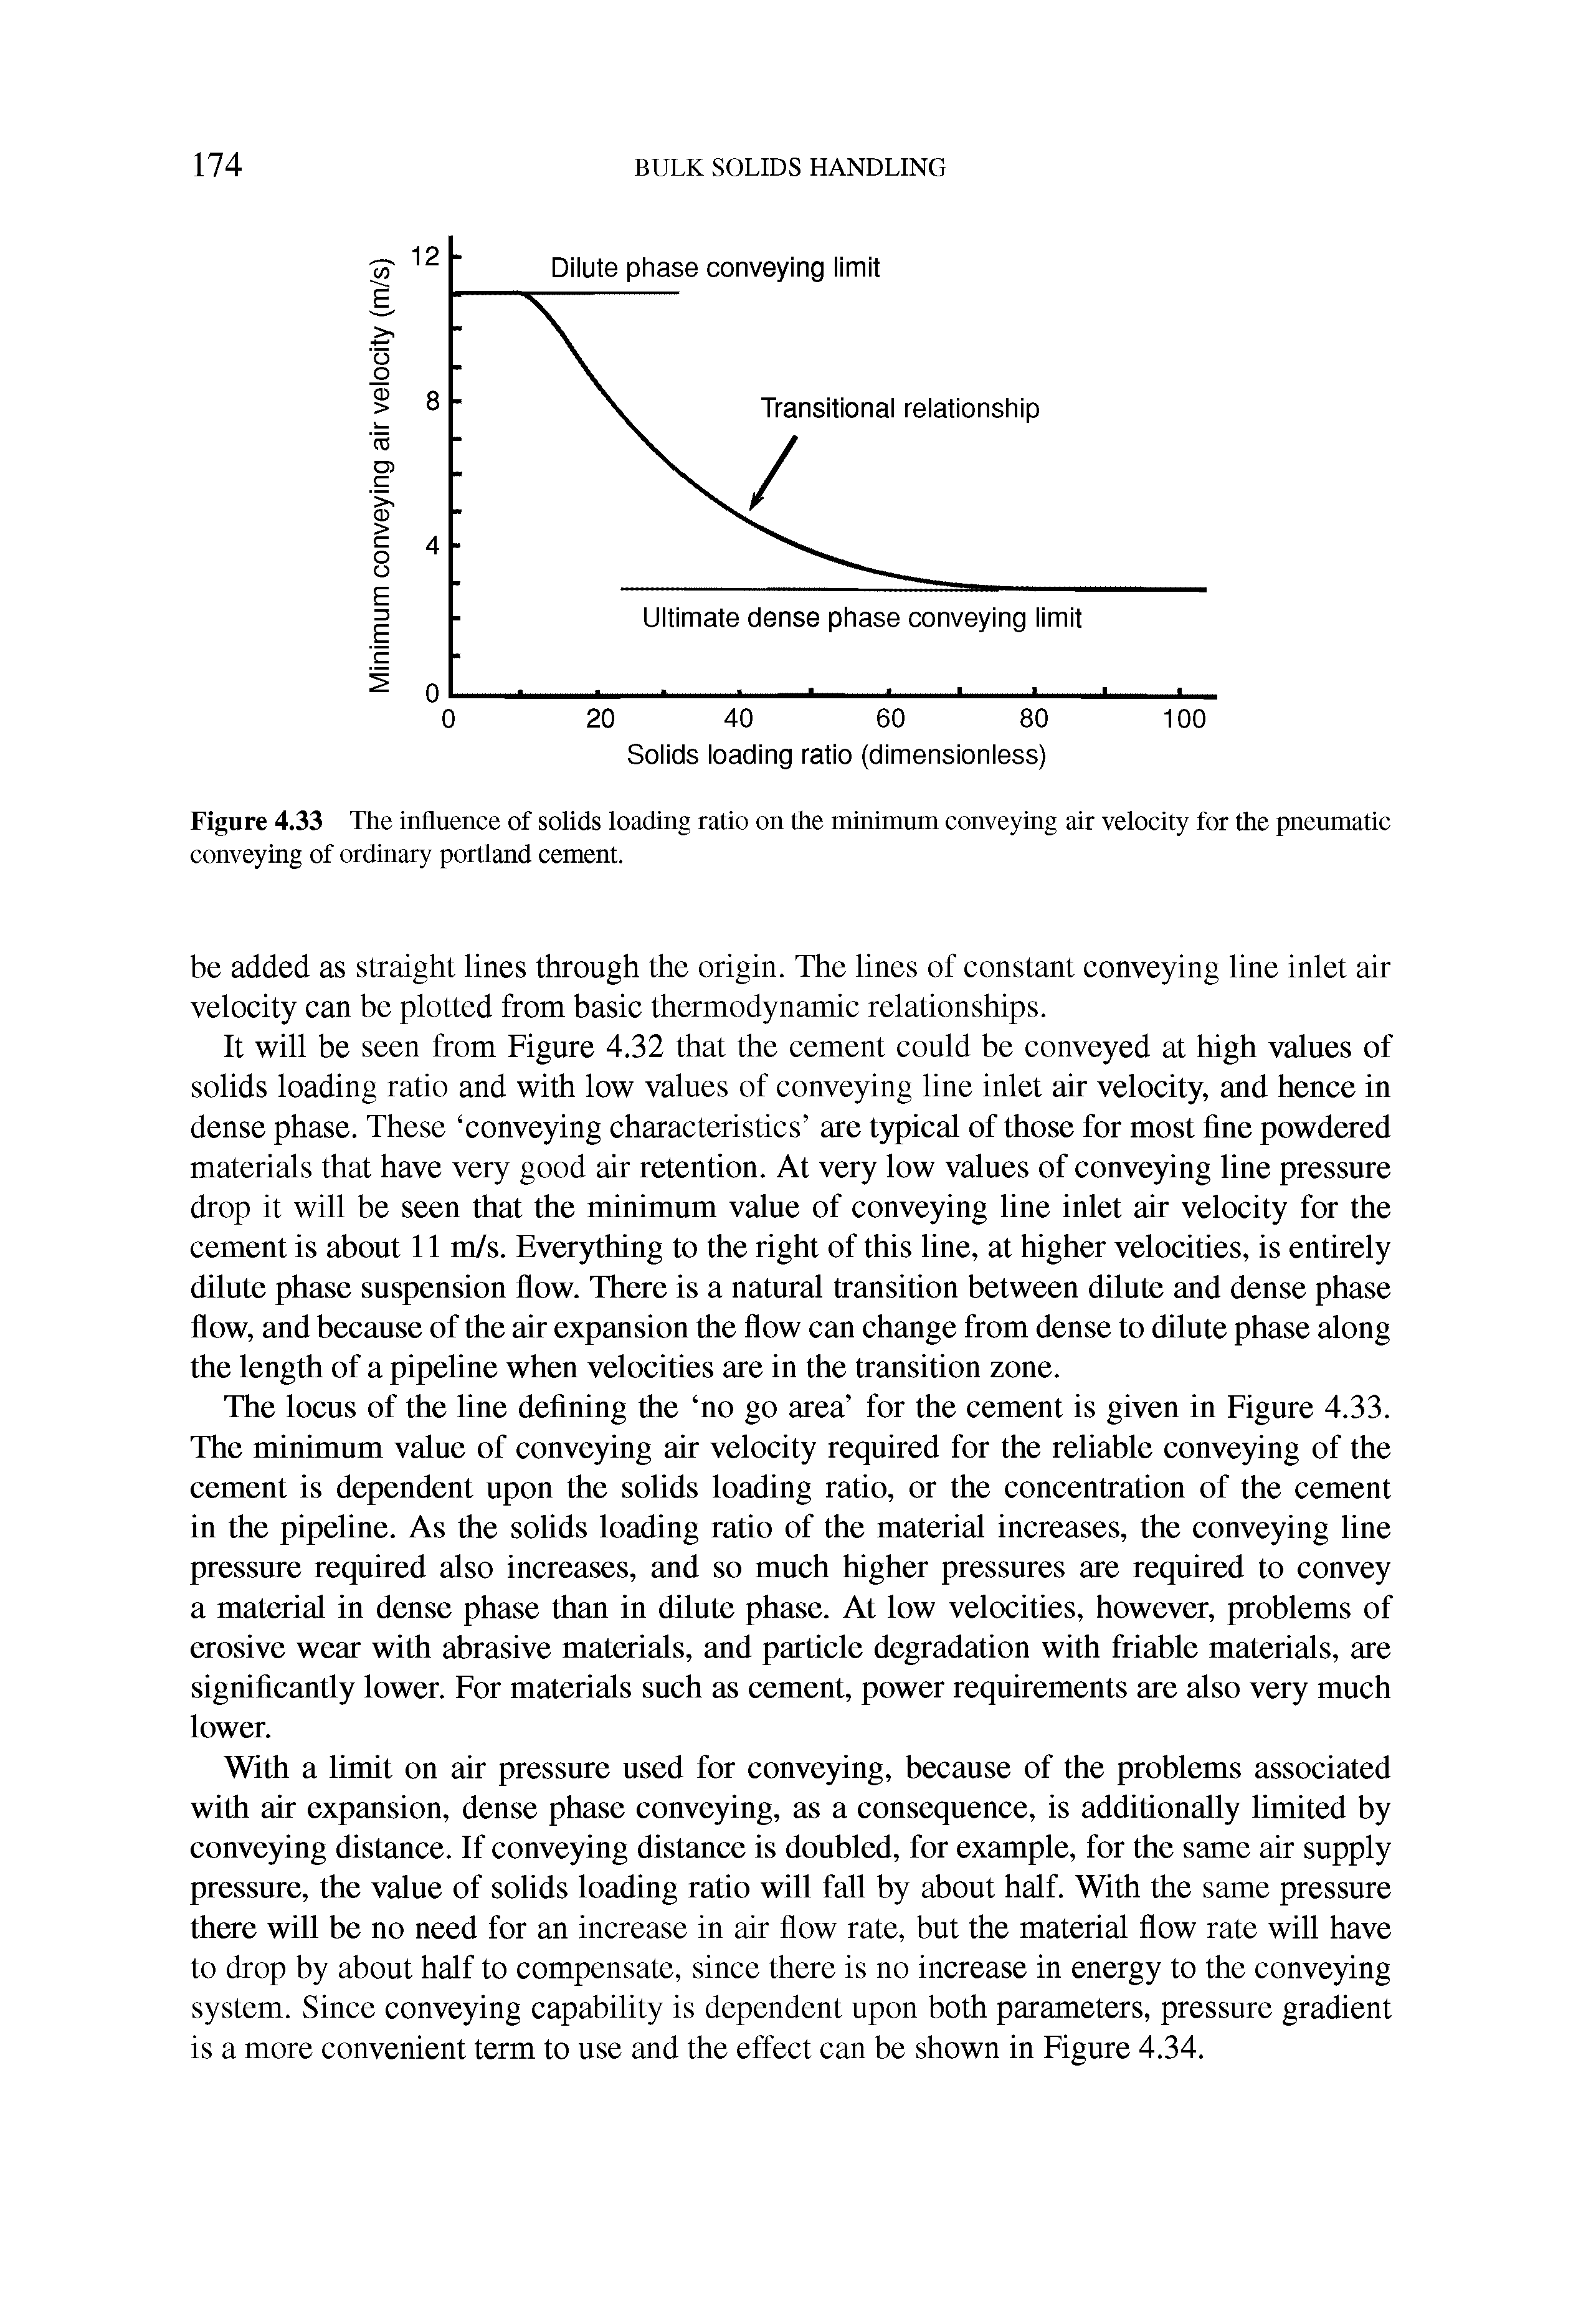 Figure 4.33 The influence of solids loading ratio on the minimum conveying air velocity for the pnemnatic conveying of ordinary portland cement.